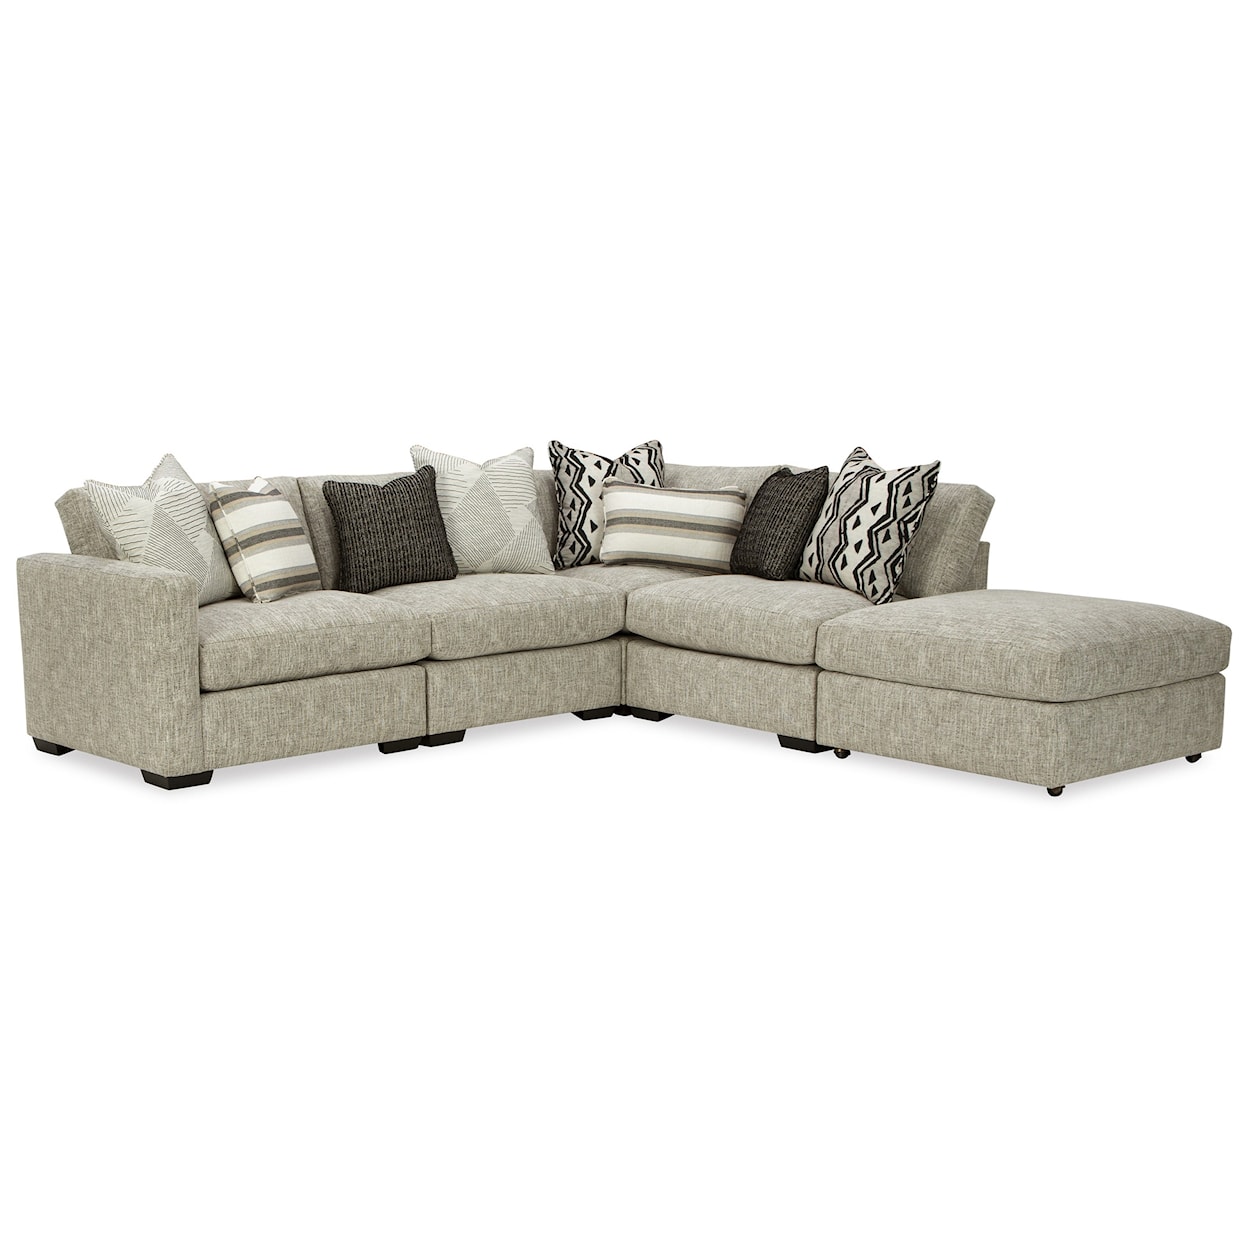 Craftmaster Crystal 5-Piece Sectional Sofa